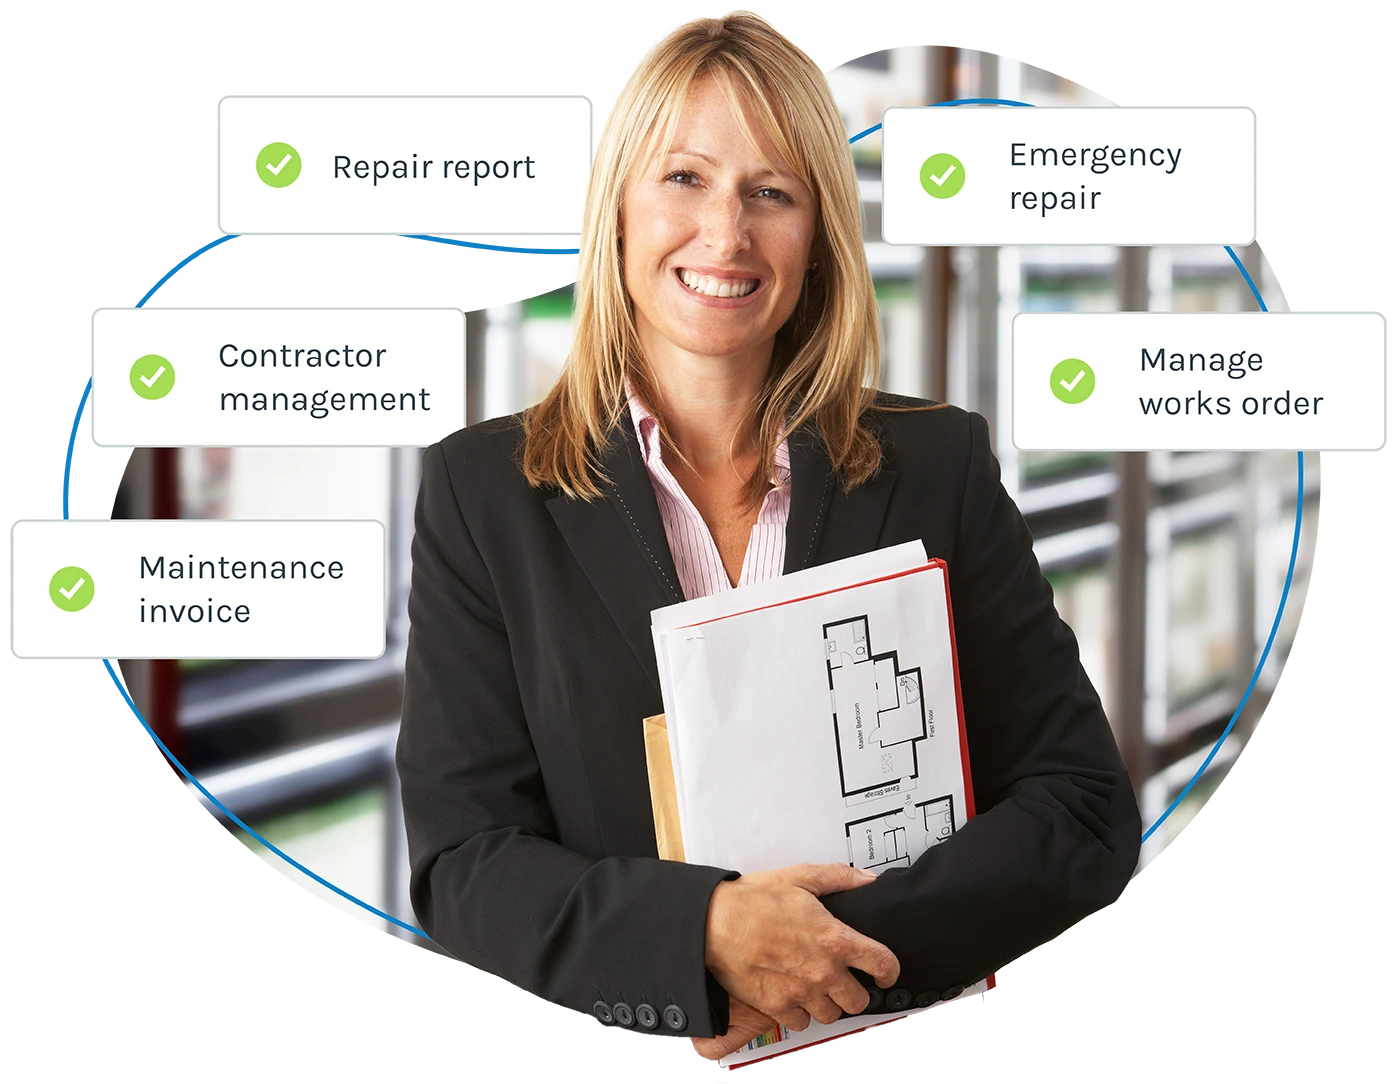 A smiling letting agent with checkbox illustrations of work completed via Fixflo's software including contractor management